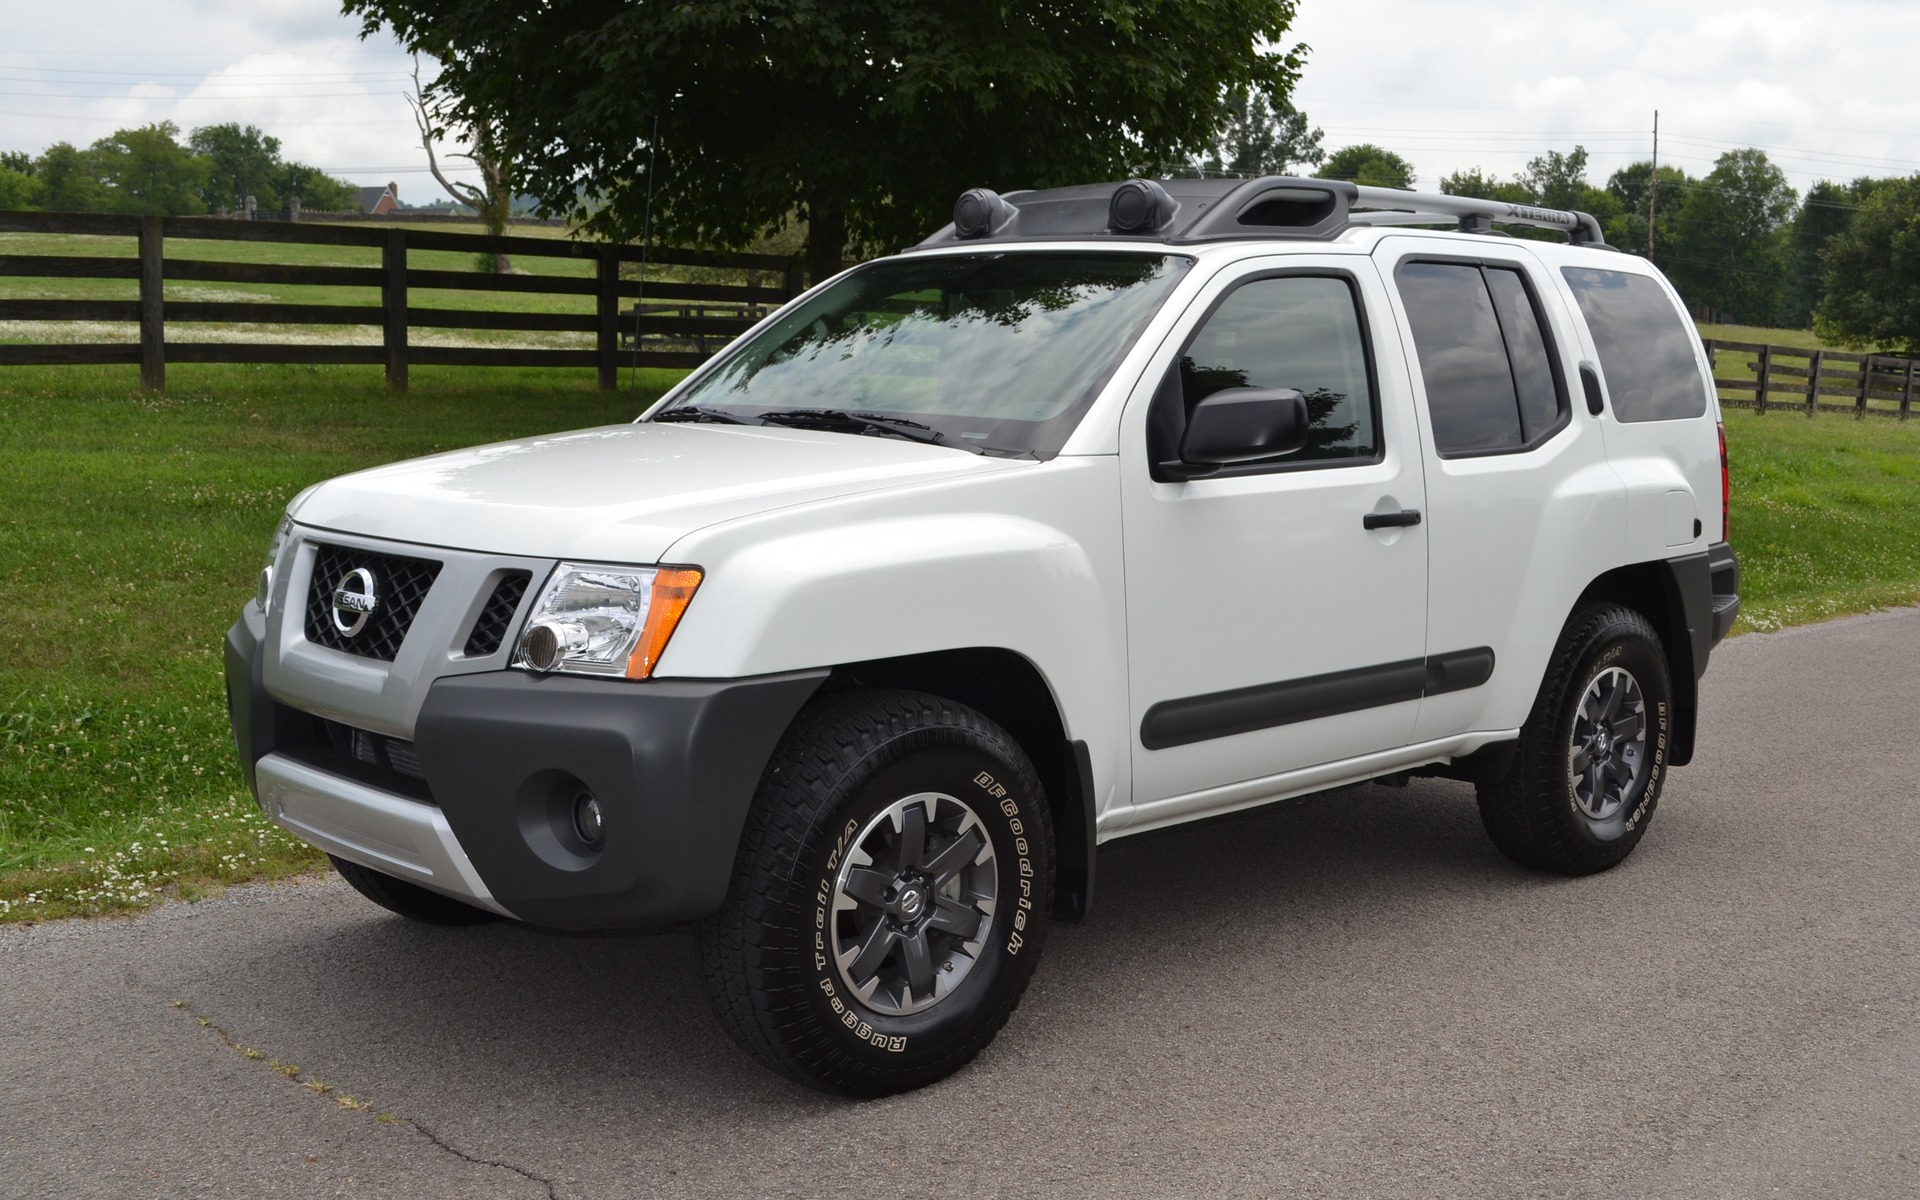 Nissan's Xterra Might Be On Its Way Out - The Car Guide